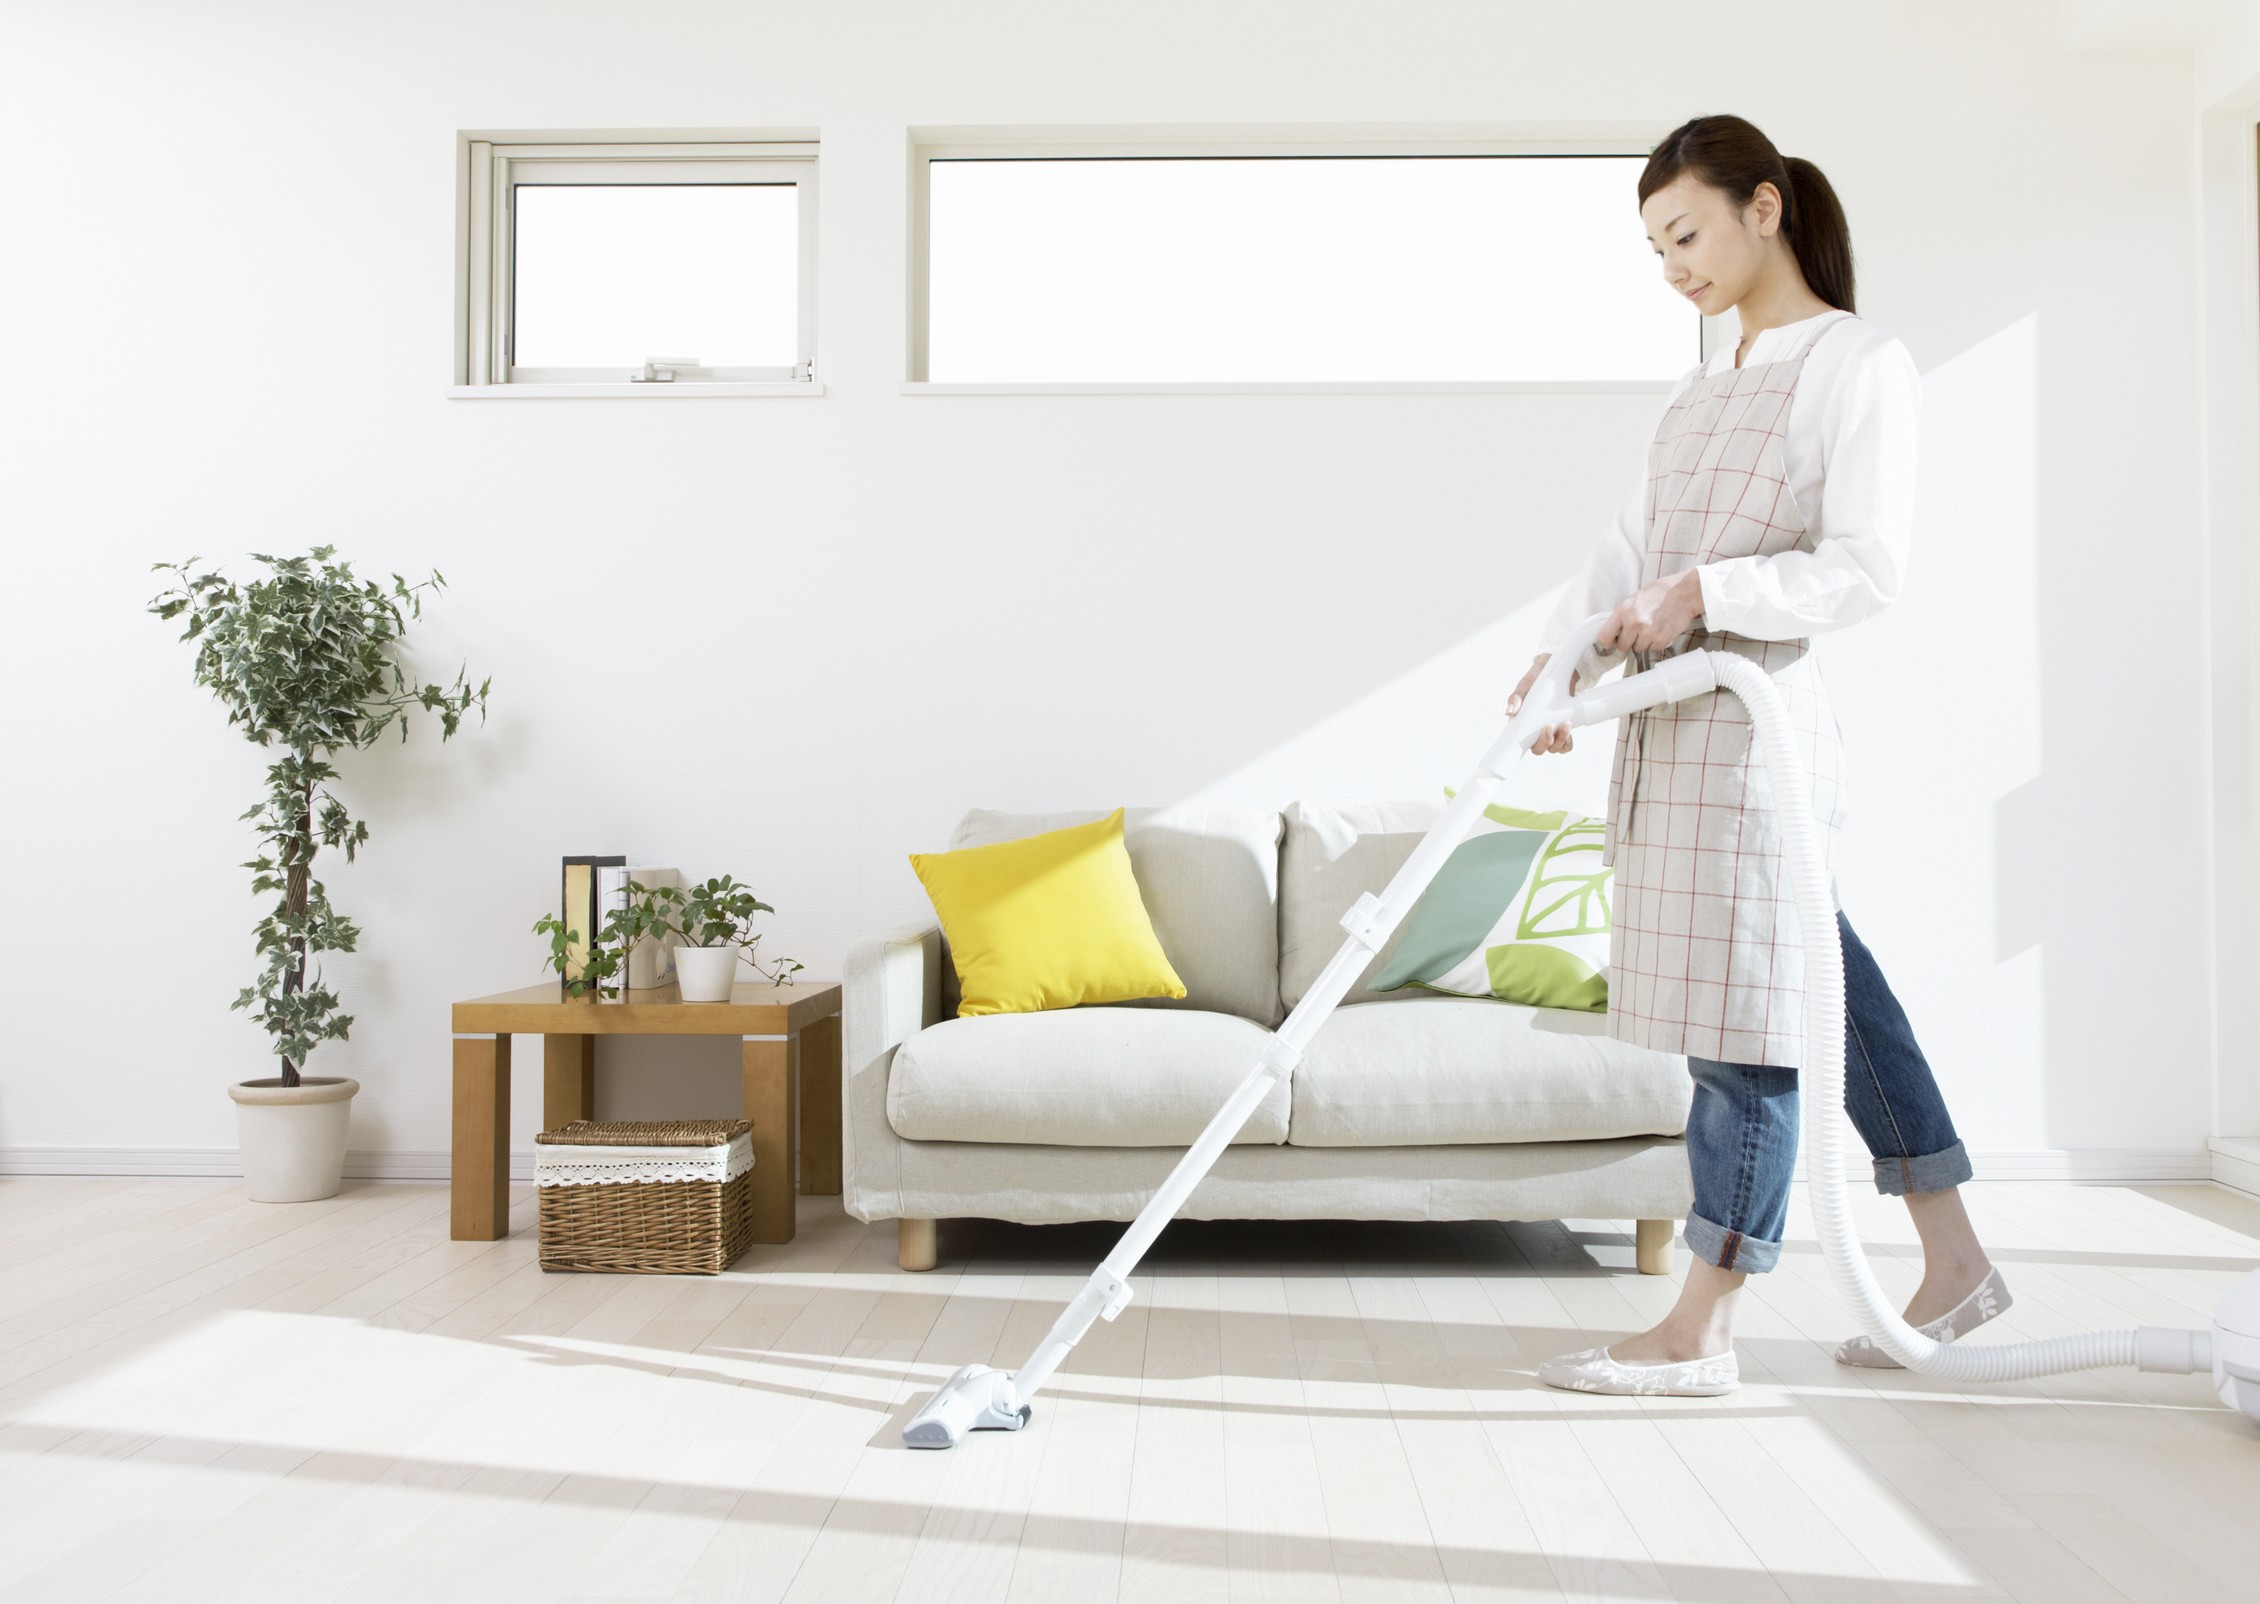 Hiring Professional Carpet Cleaners Is Better As Compared To Cleaning At Home